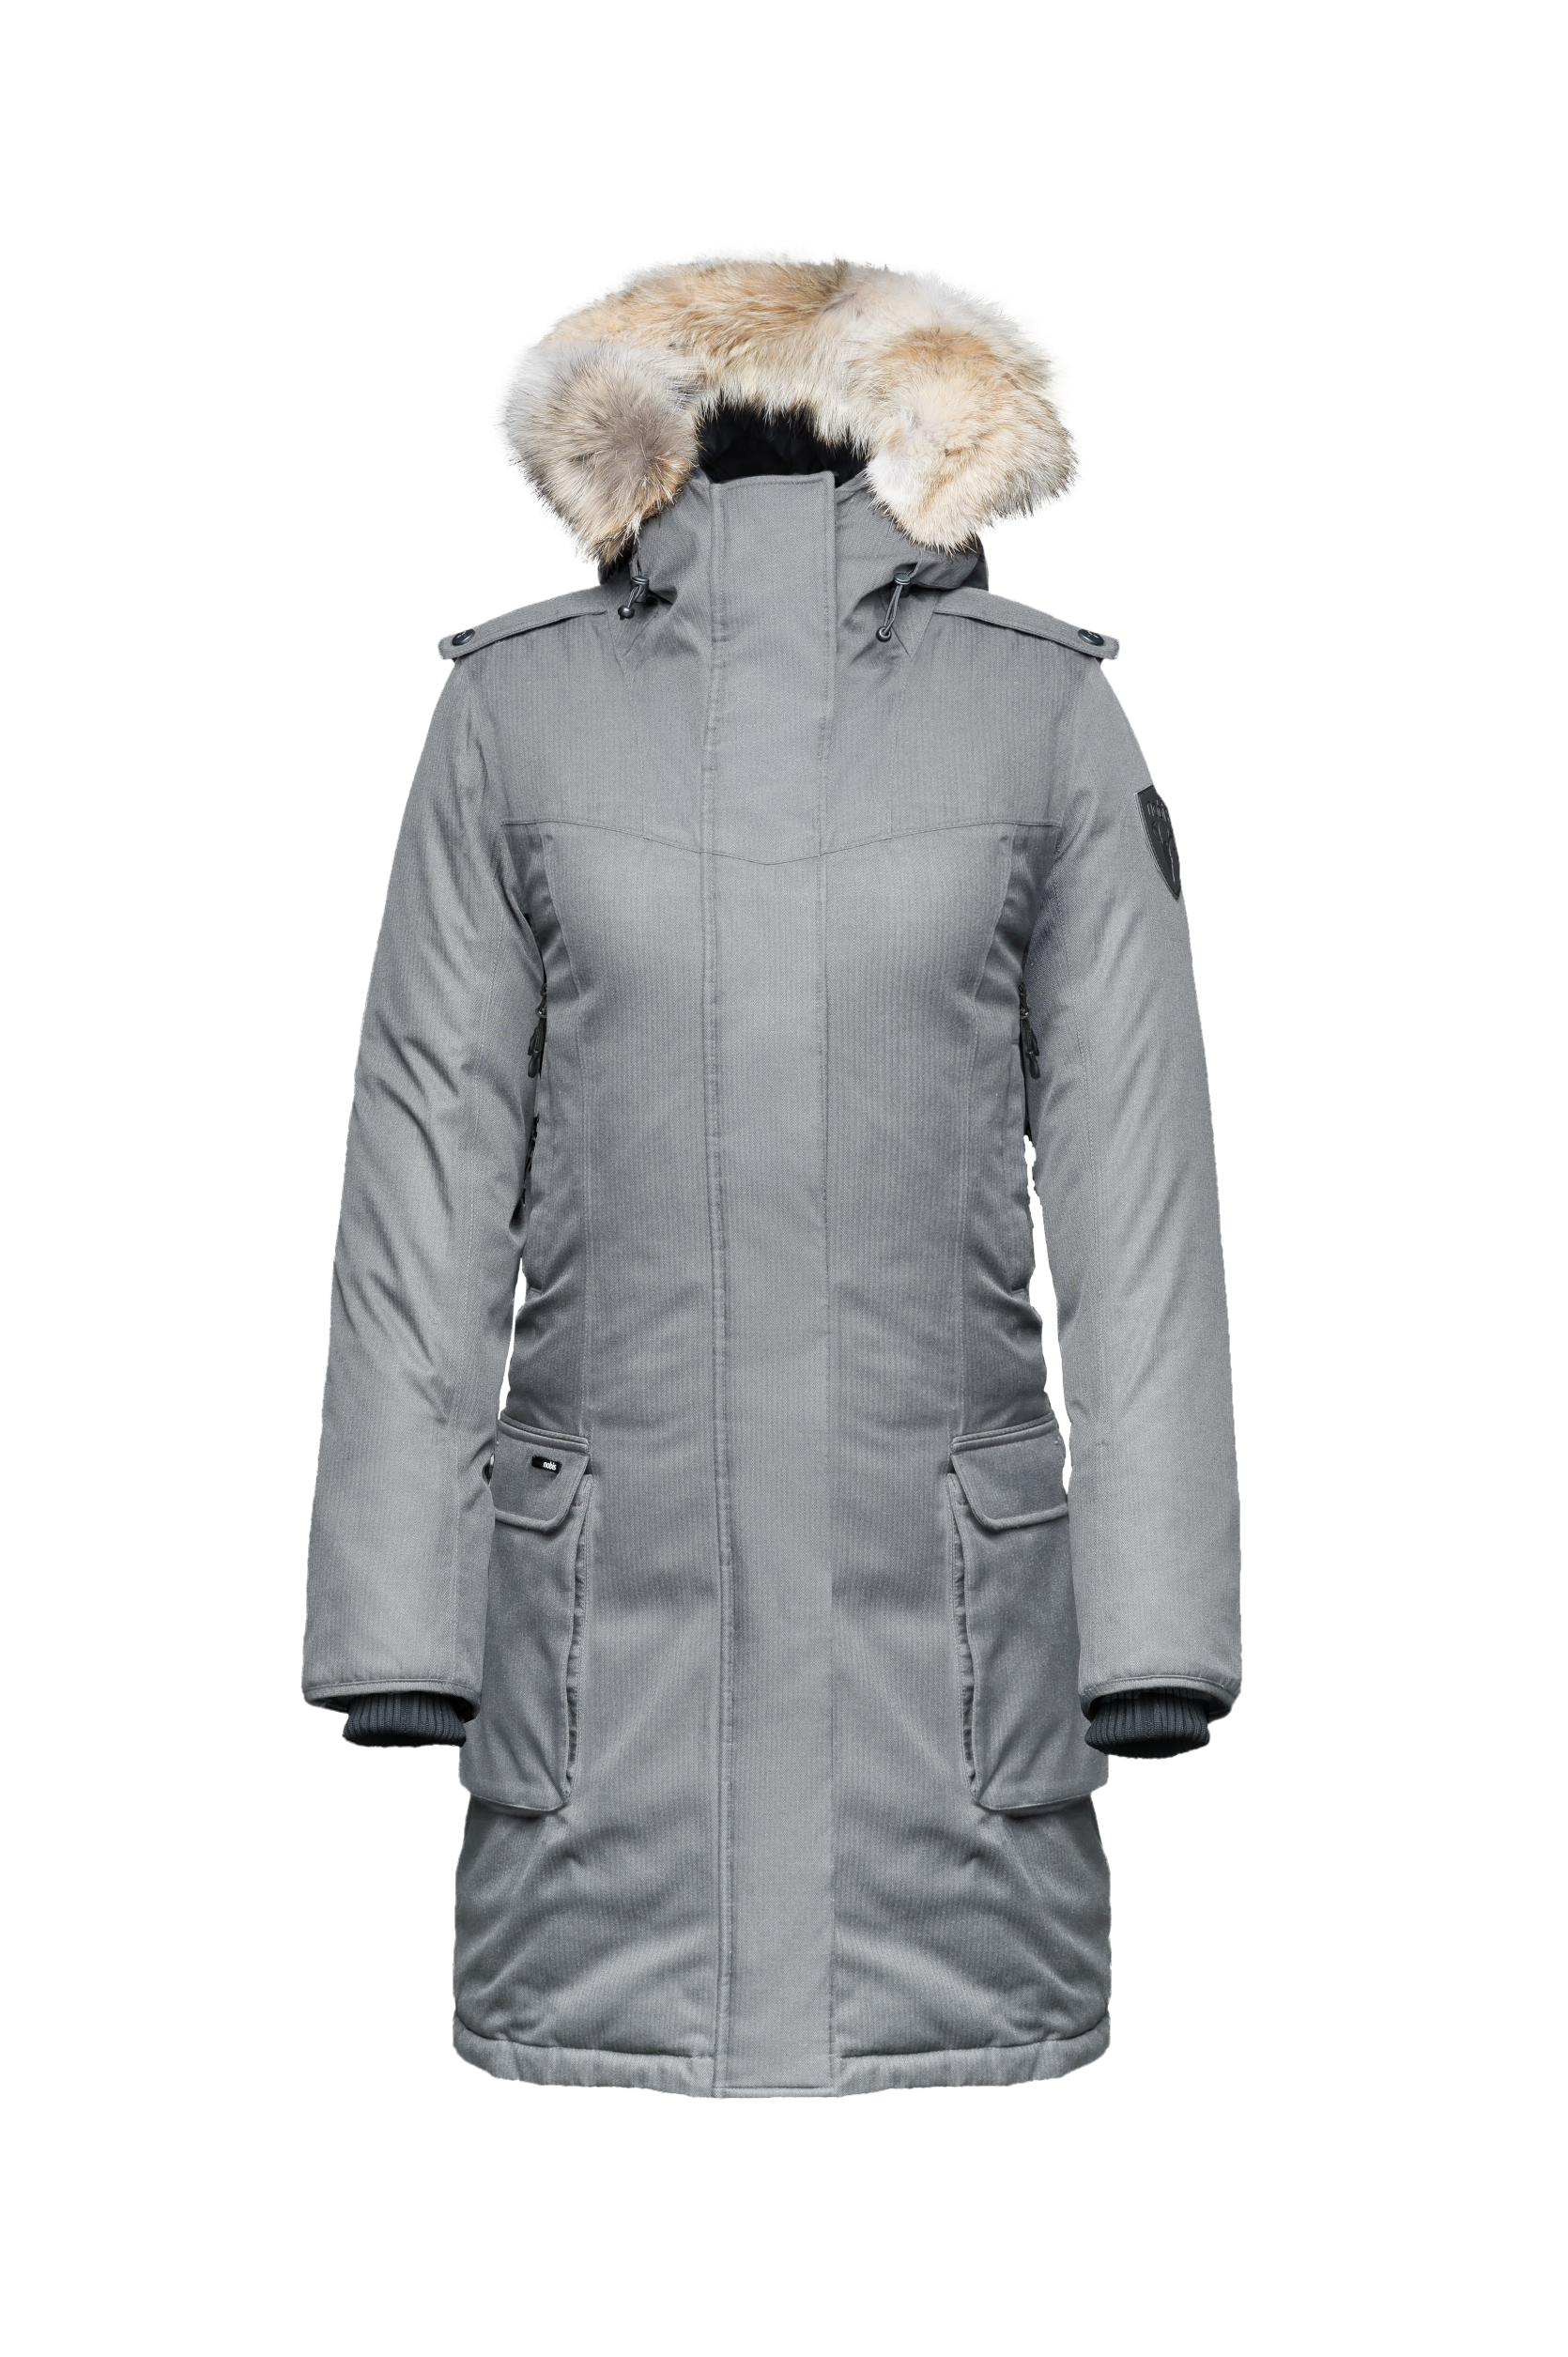 Women's knee length down filled parka with fur trim hood in CH Concrete